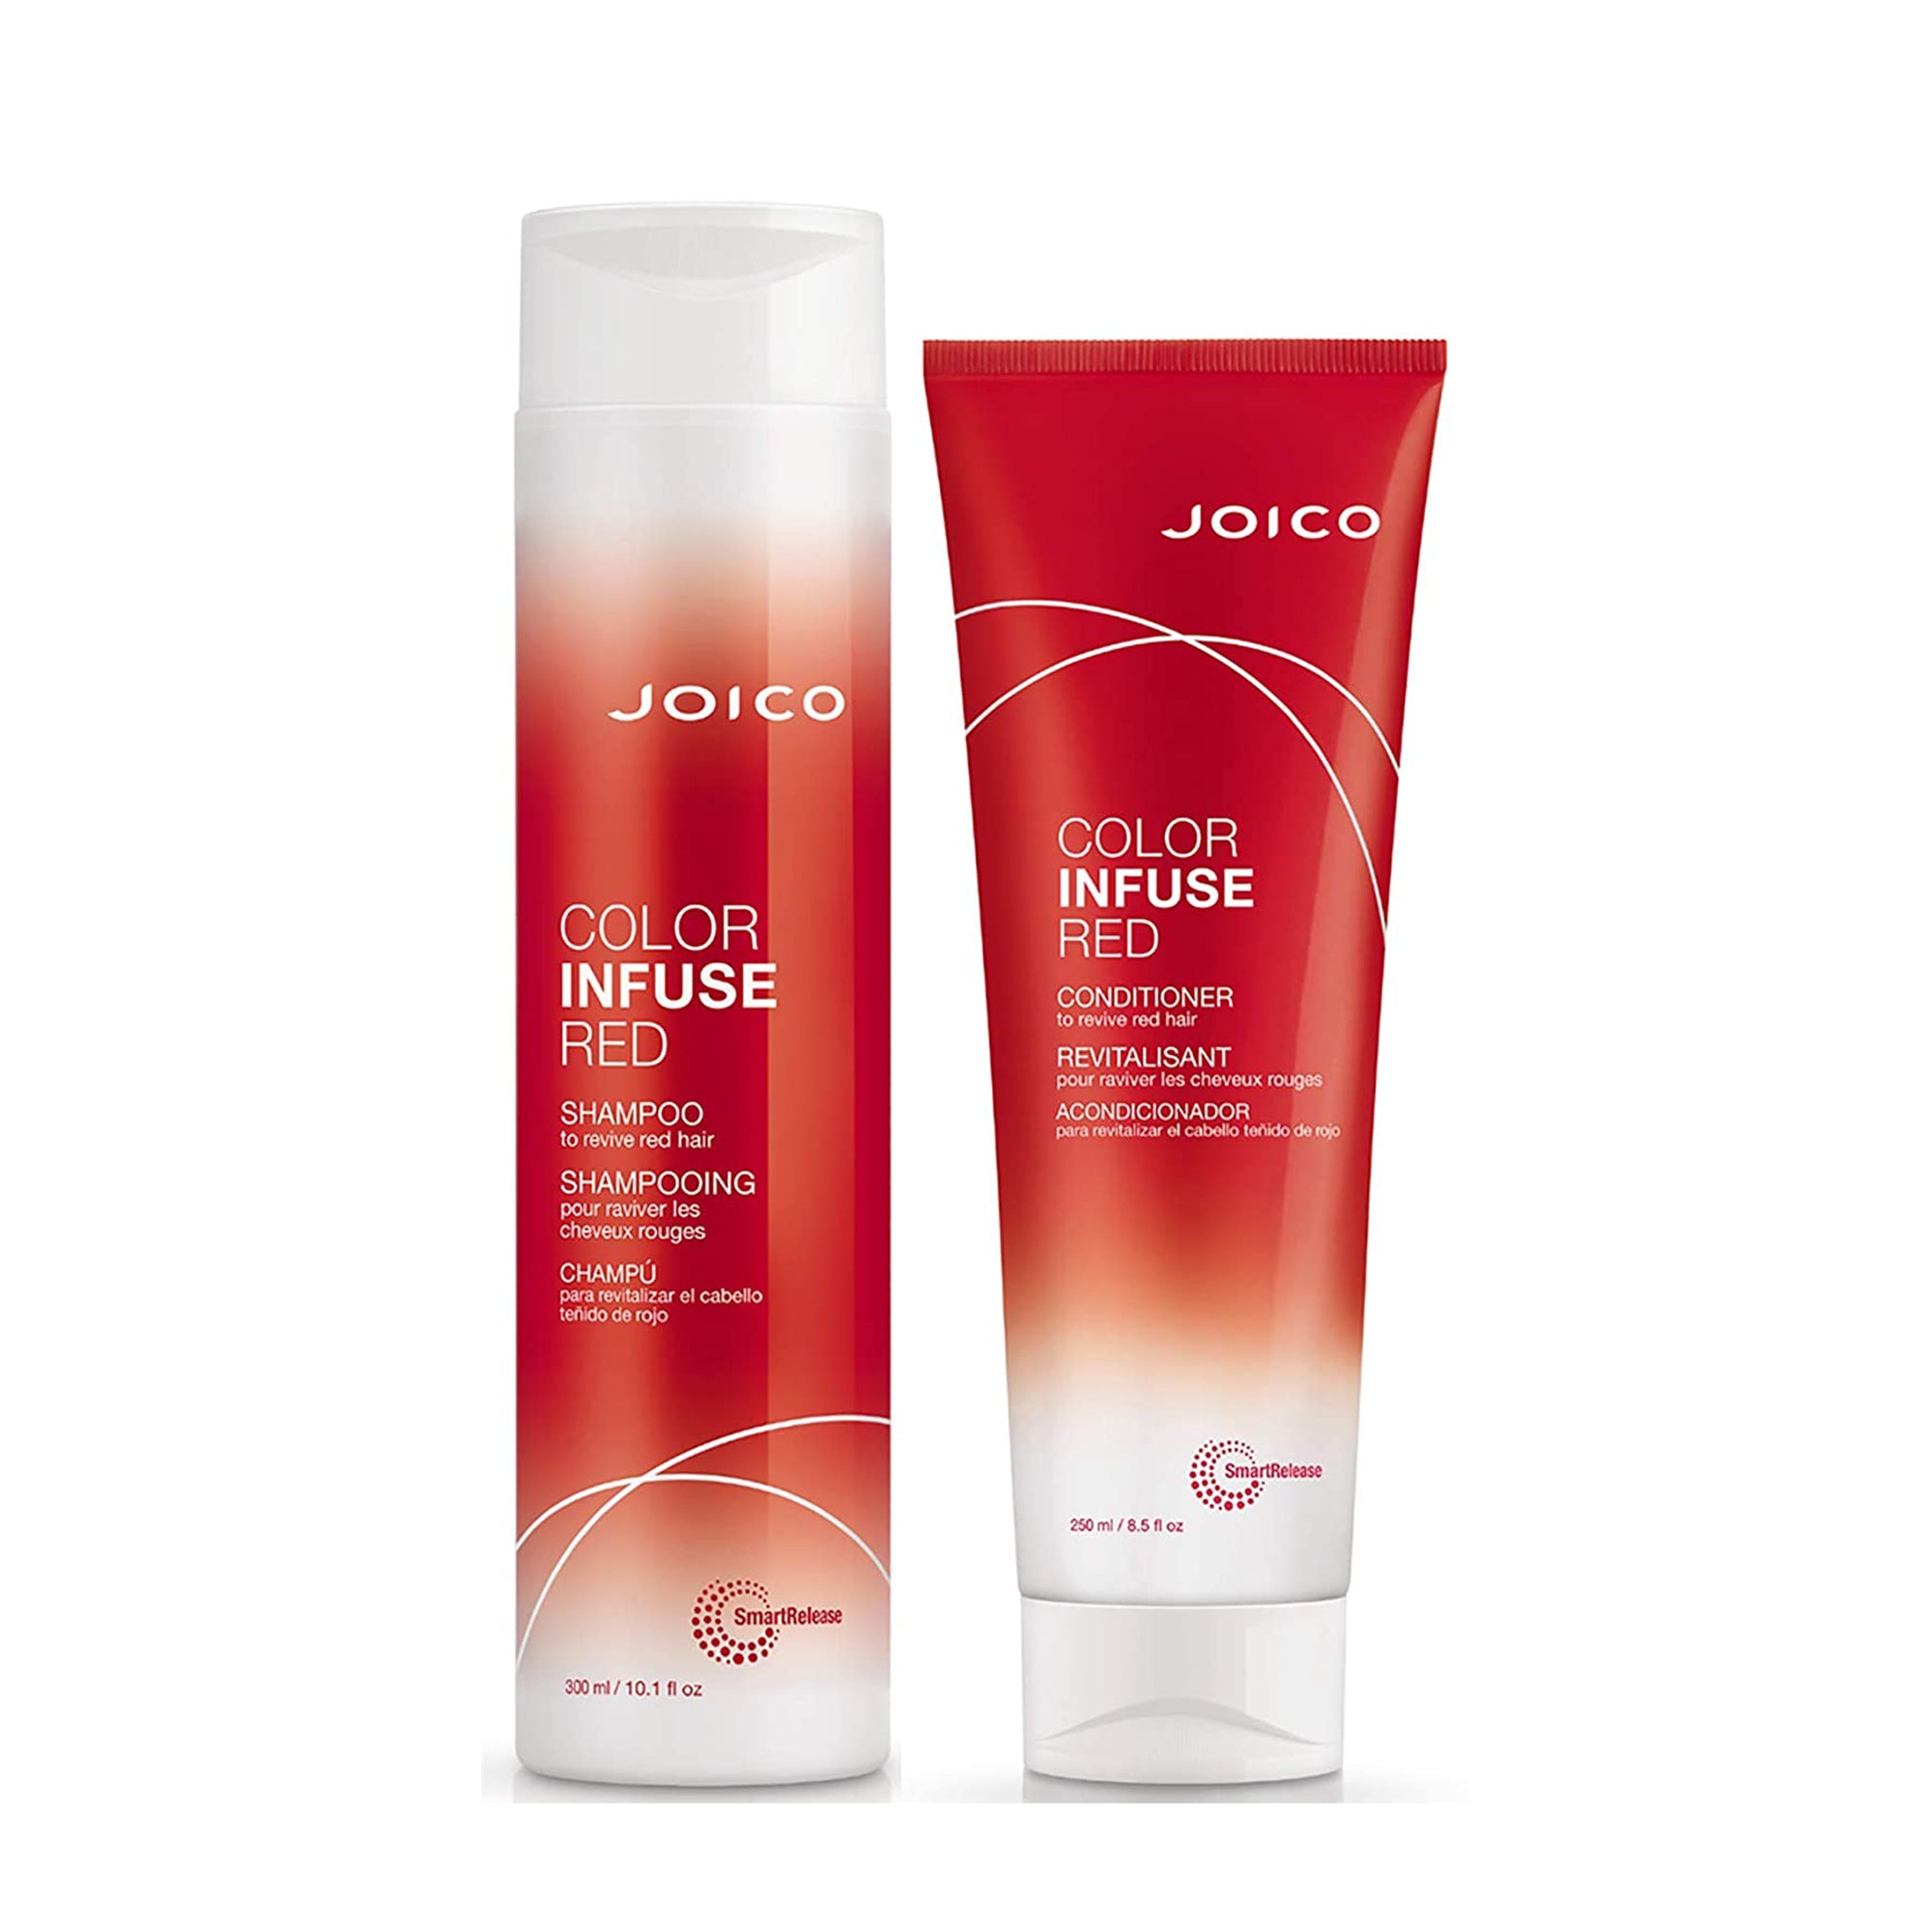 Joico Color Infuse Red Shampoo and Conditioner Duo ($48 VALUE) / 10 OZ